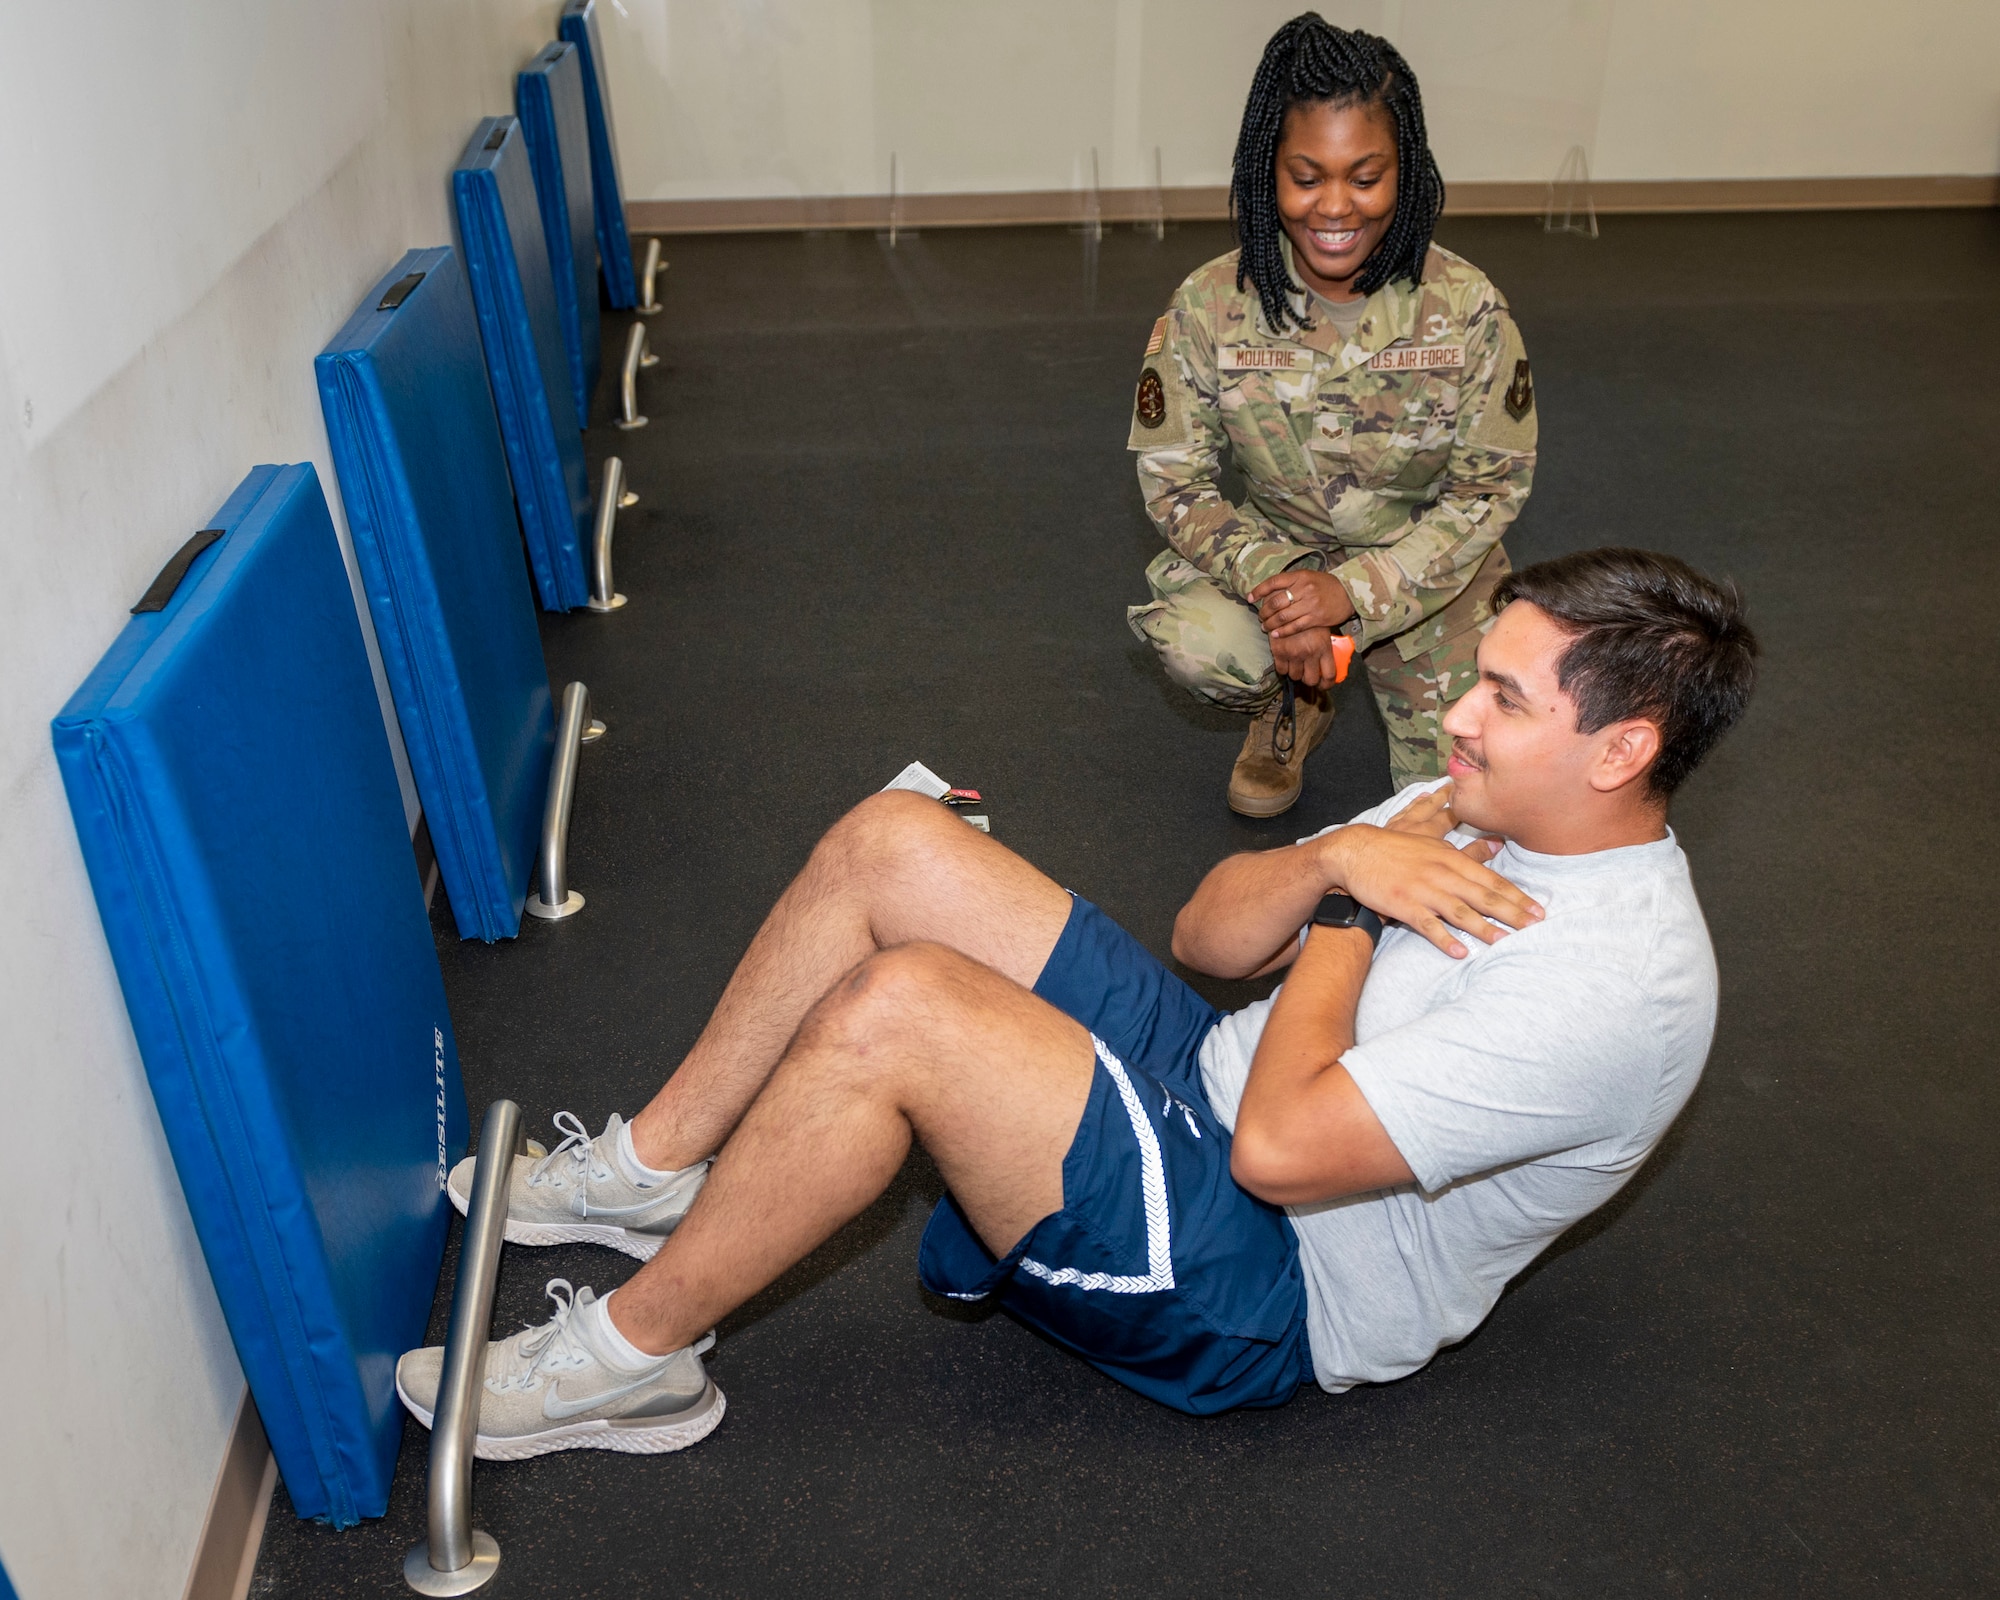 Senior Airman Kevin McMahon, 333rd Fighter Squadron weapons load crew member, performs sit-ups while Senior Airman Deja Moultrie, 916th Force Support Squadron service technician counts his repetitions at Seymour Johnson Air Force Base, North Carolina, July 15, 2021.